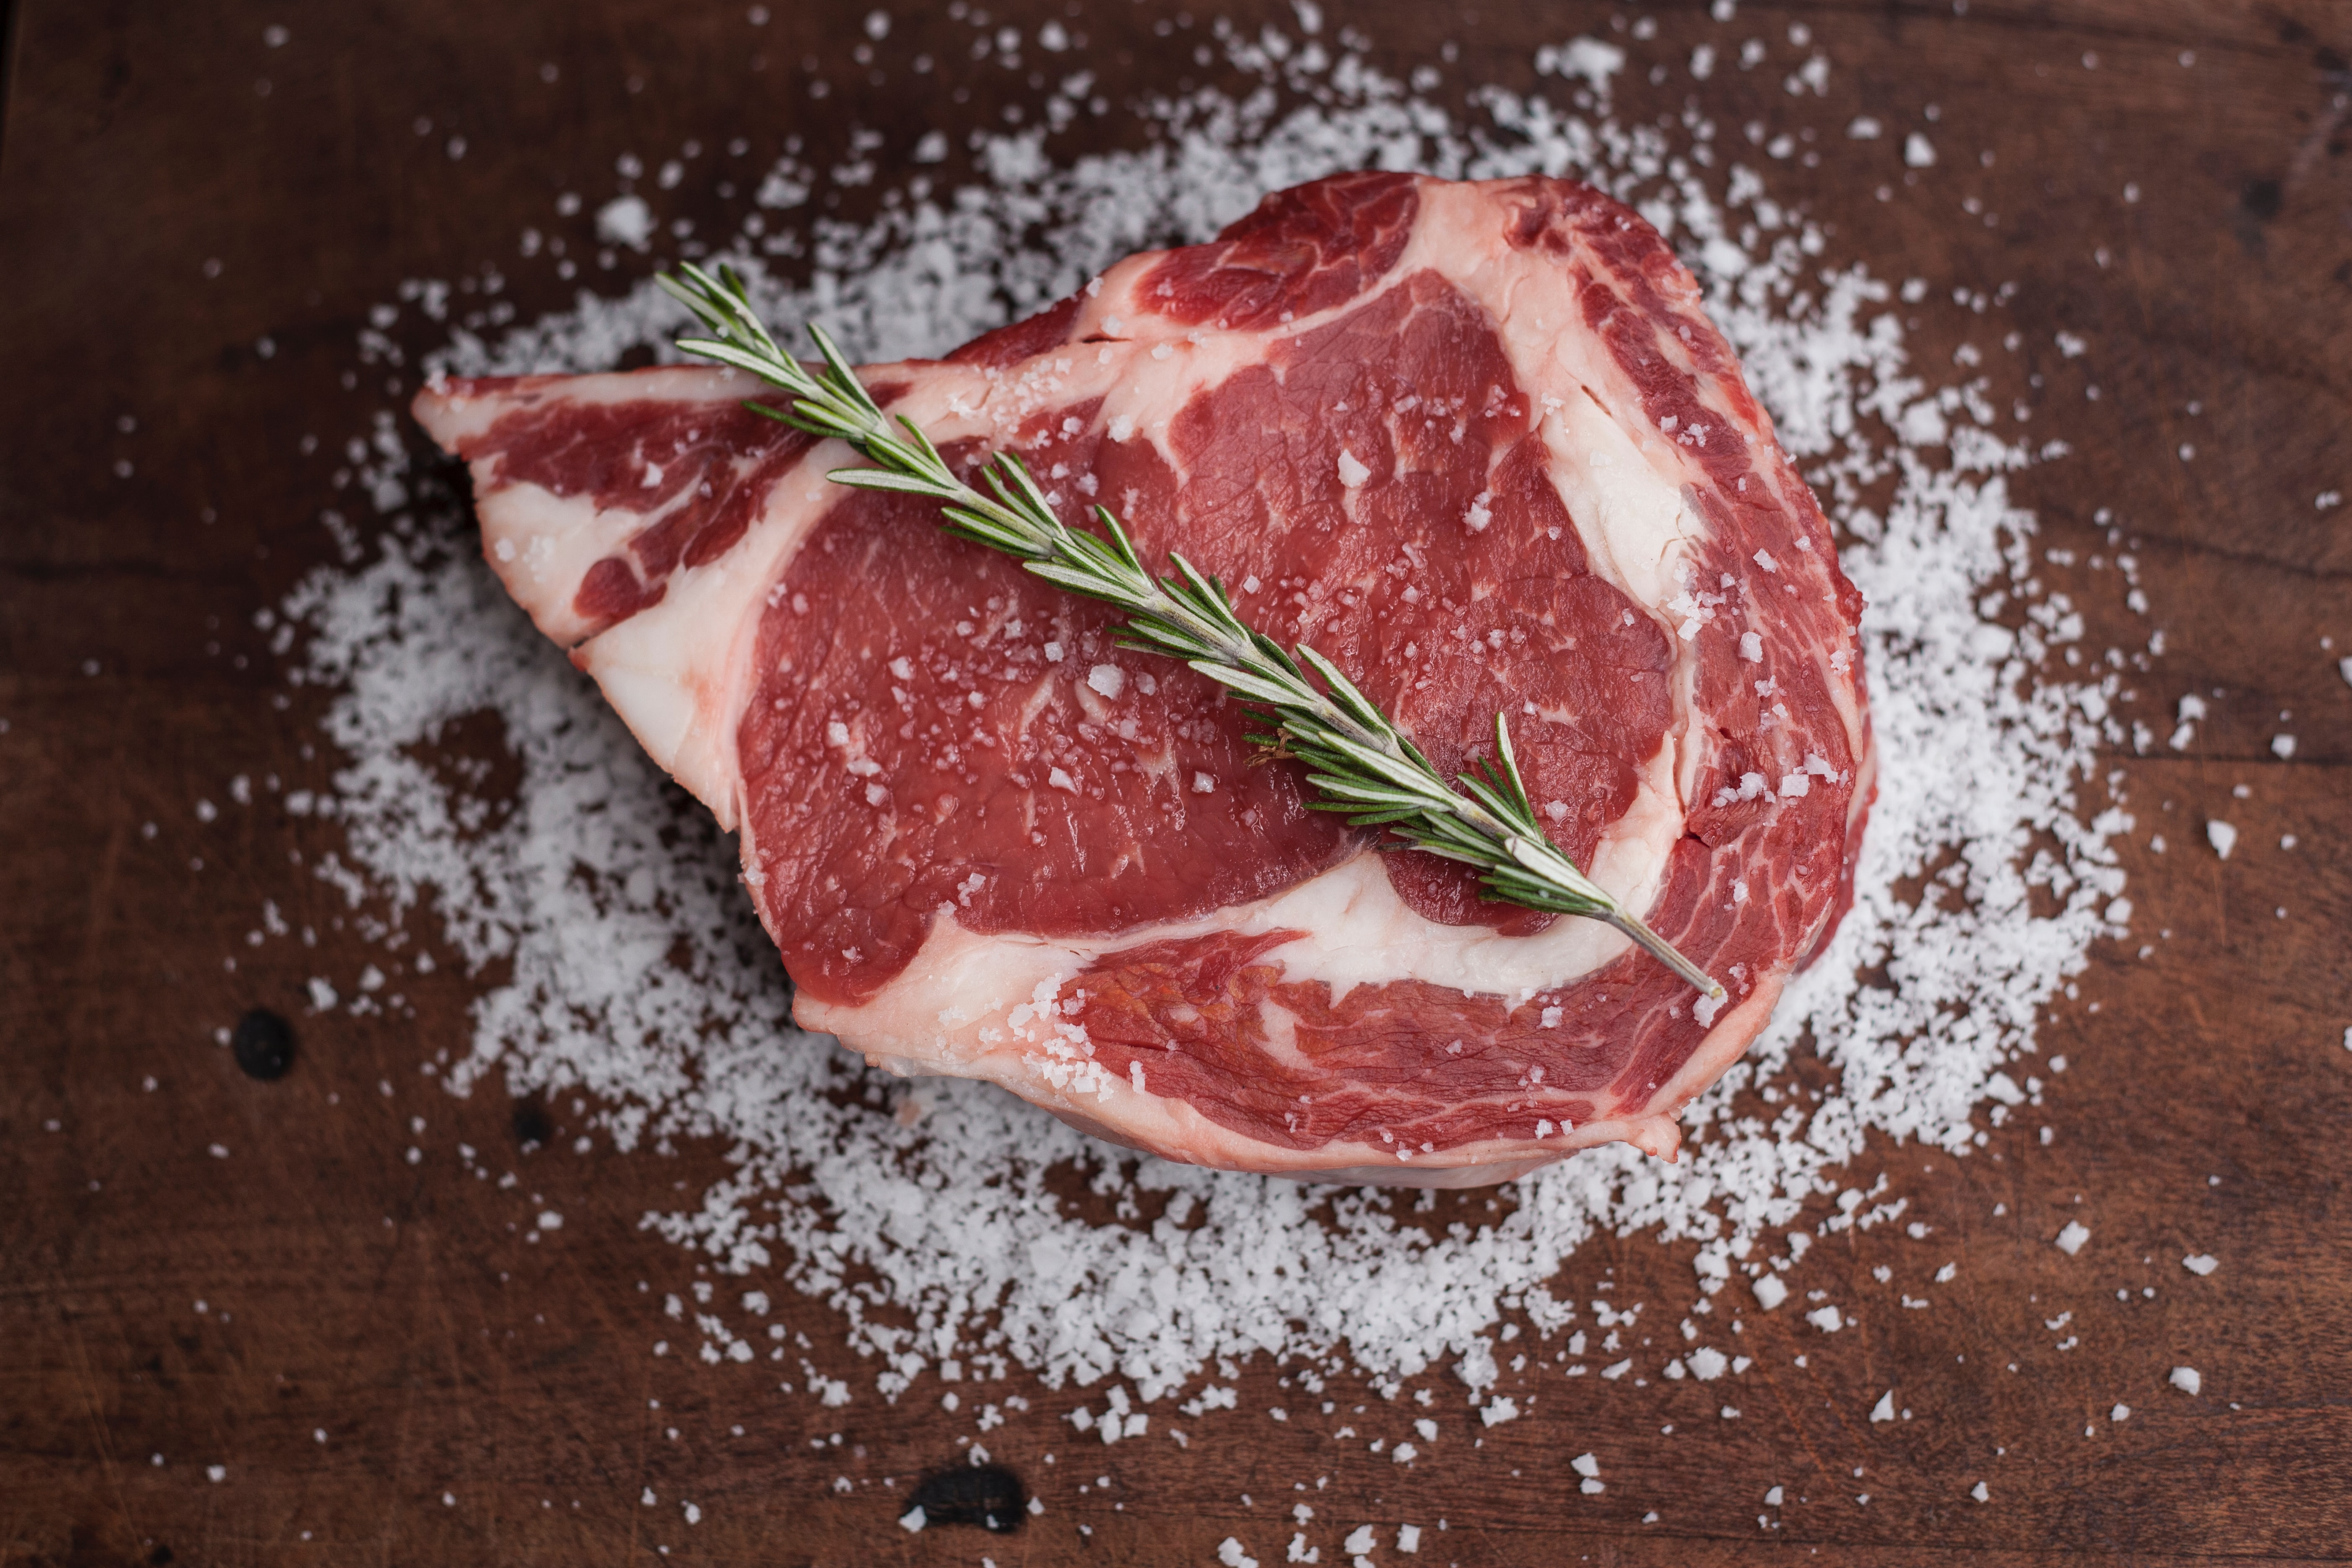 Some olive oil, herbs and salt make a simple rub for your steak.